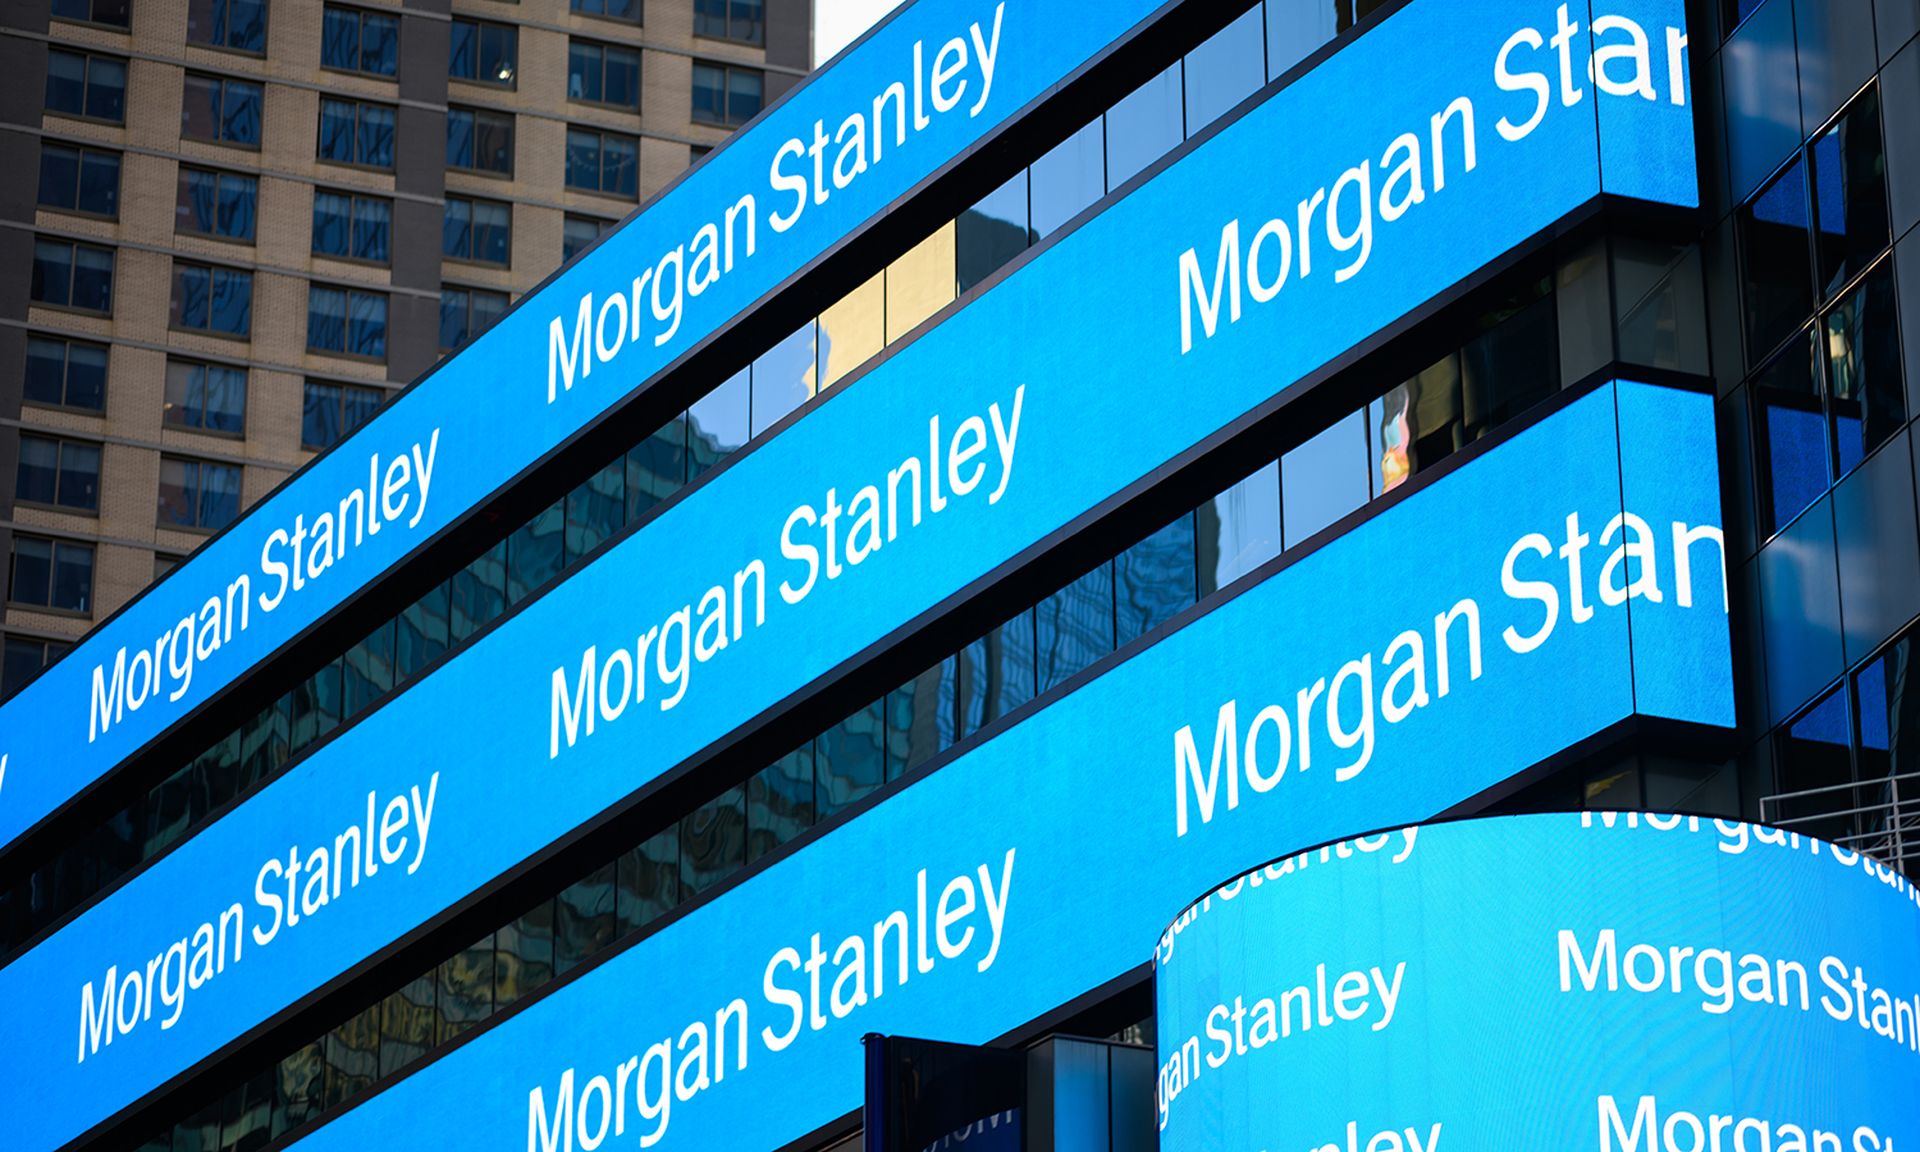 A view of the exterior of The Morgan Stanley Headquarters at 1585 Broadway in Times Square in New York City in July 2021. (Photo by Michael Lawrence/Getty Images for Morgan Stanley)